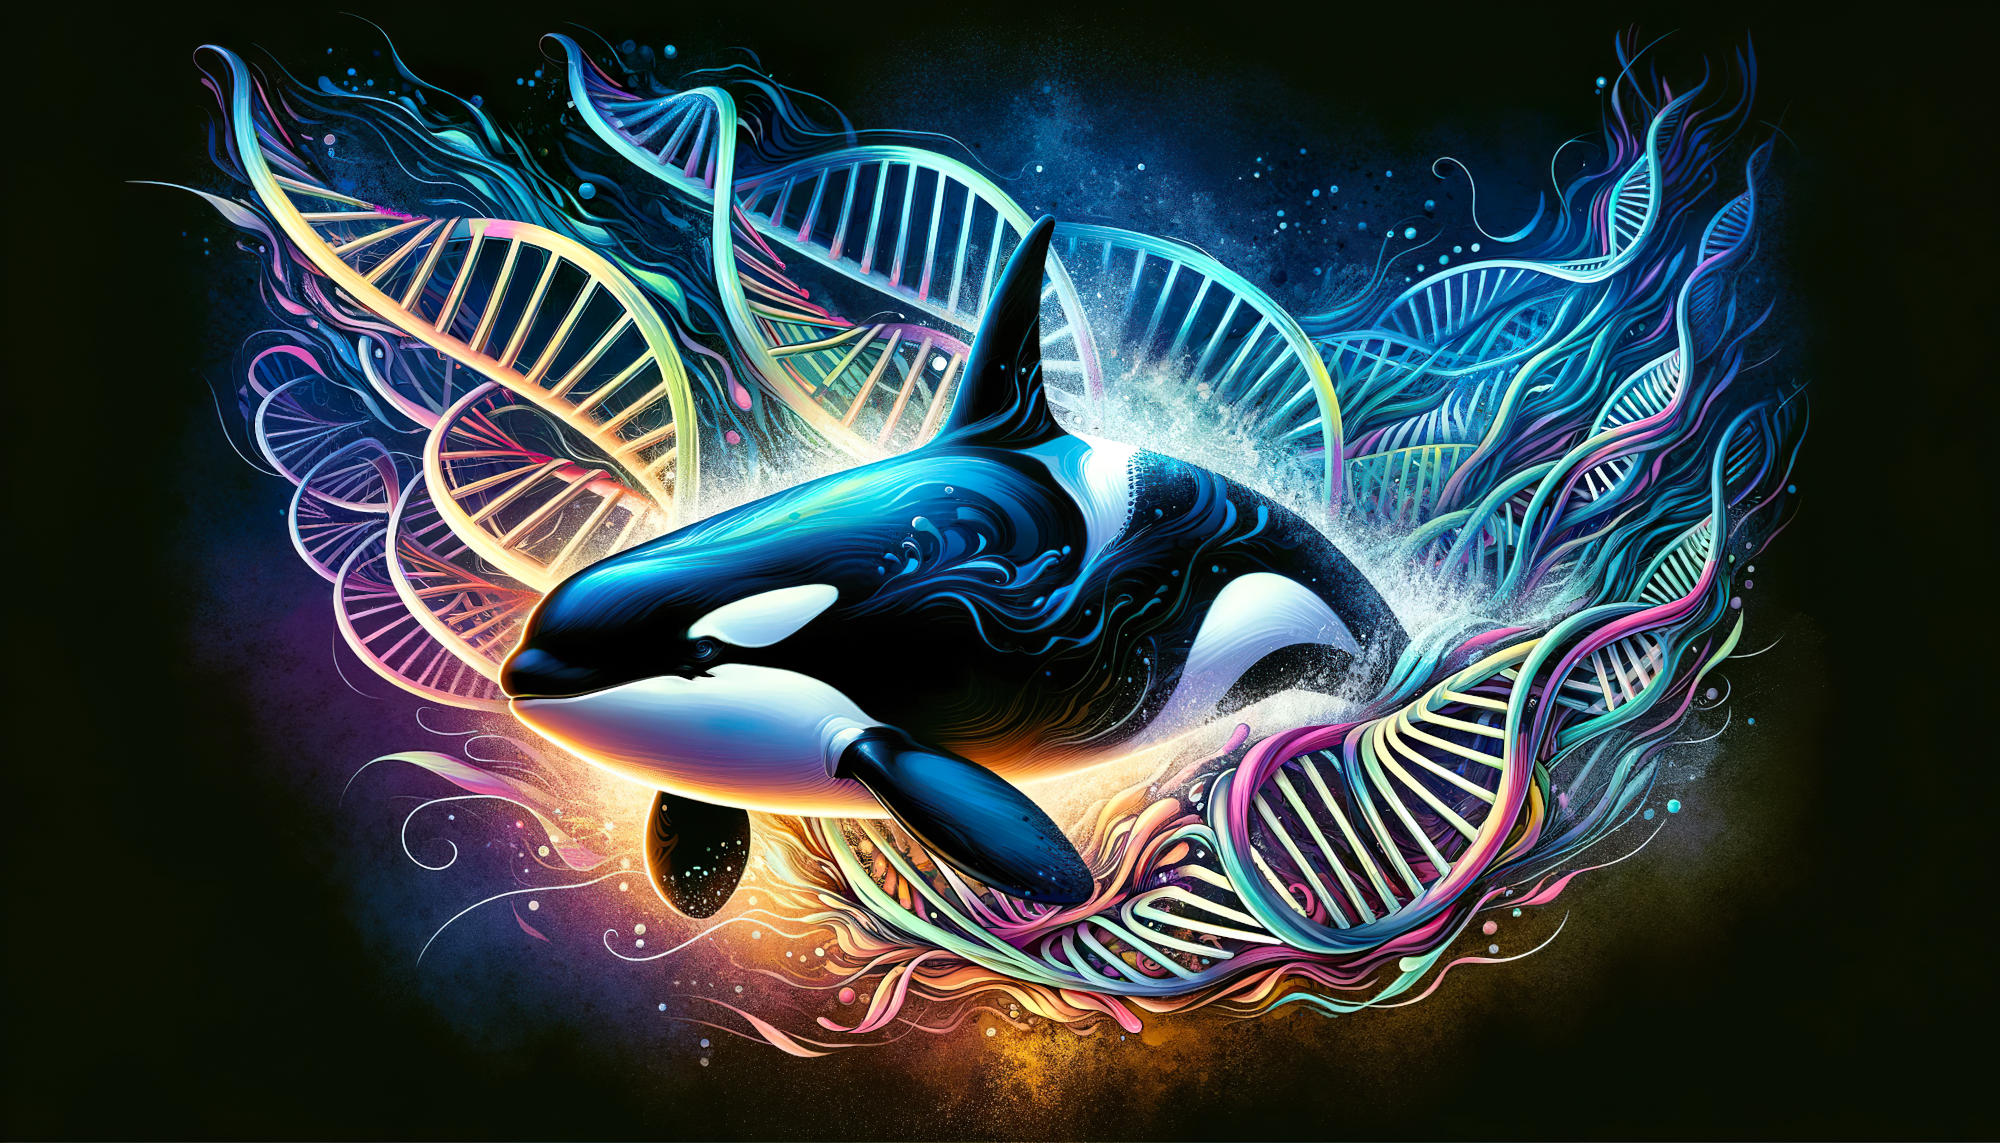 Scientists Unravel Evolutionary Secrets of “Old Tom” and the Killer Whales of Eden